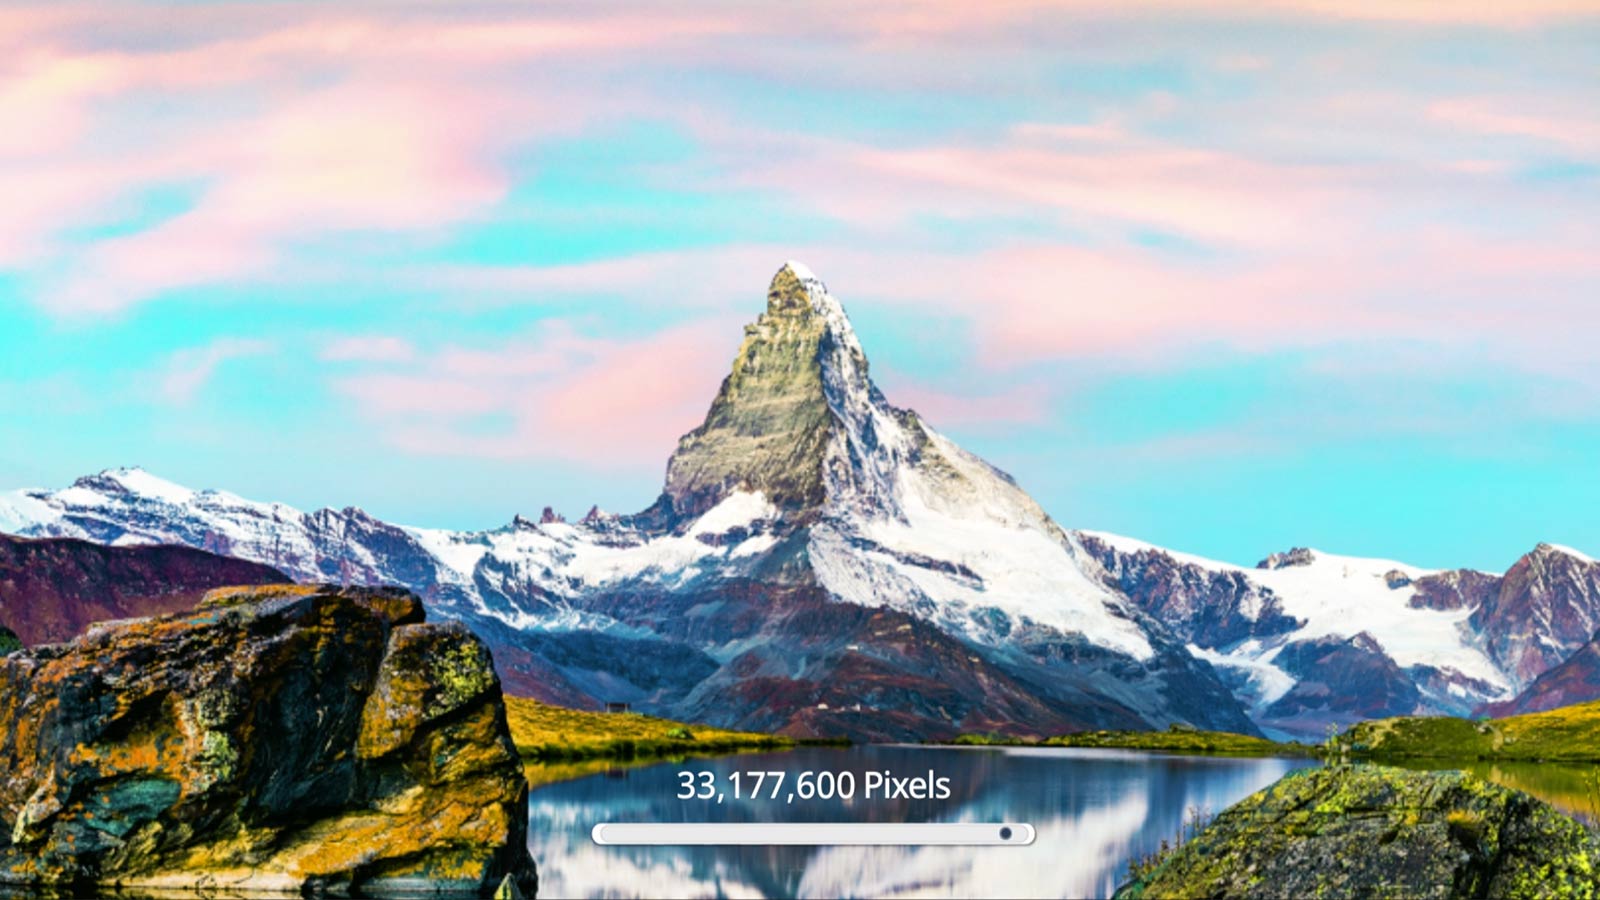 A scene of a mountain showing the improvement in image quality as the number of pixels increases to 33,177,600 in 8K resolution (play the video).